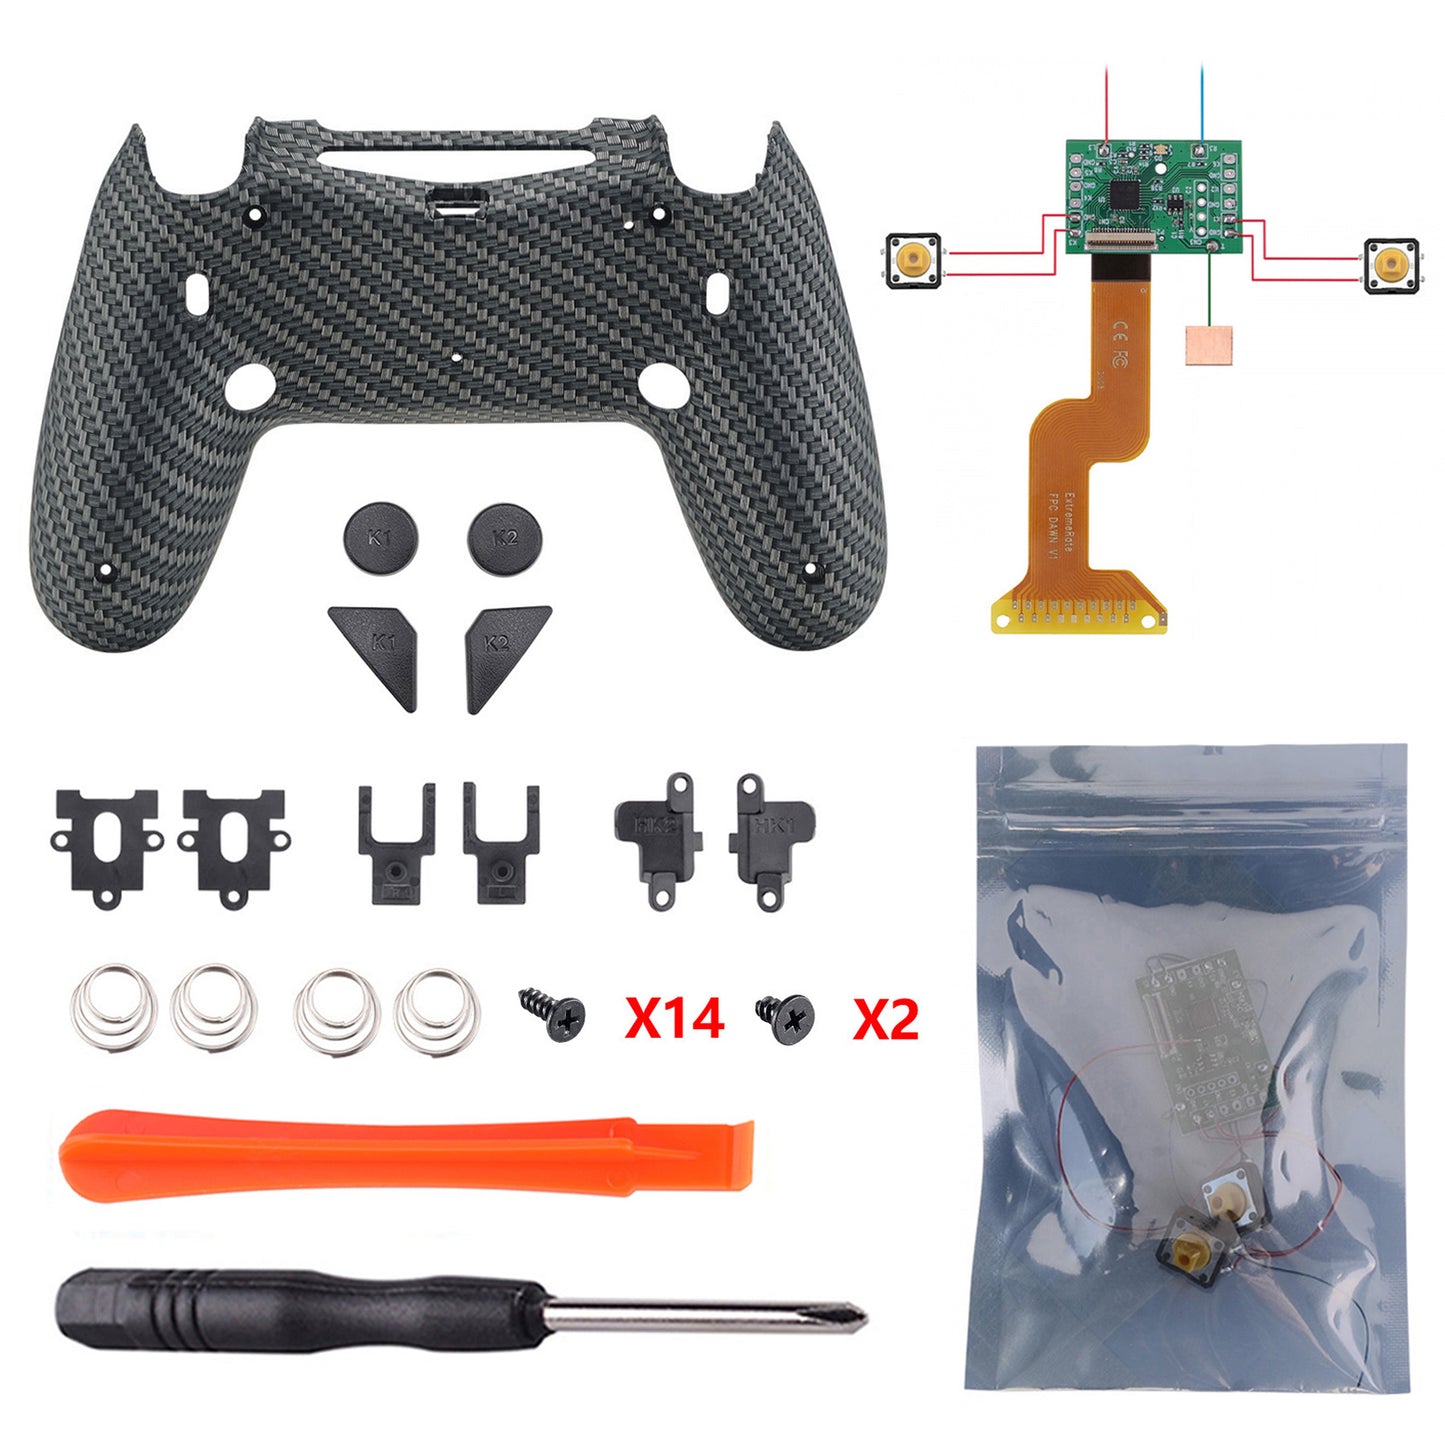 & for & Buttons Redesigned Controller Controller, Kit Lock FlashShot for & Dawn Carbon 040/050/055 – Back ps4 eXtremeRate CUH-ZCT2 Trigger JDM Fiber Upgrade Back Stop Trigger Shell Remap PS4 Board 2.0